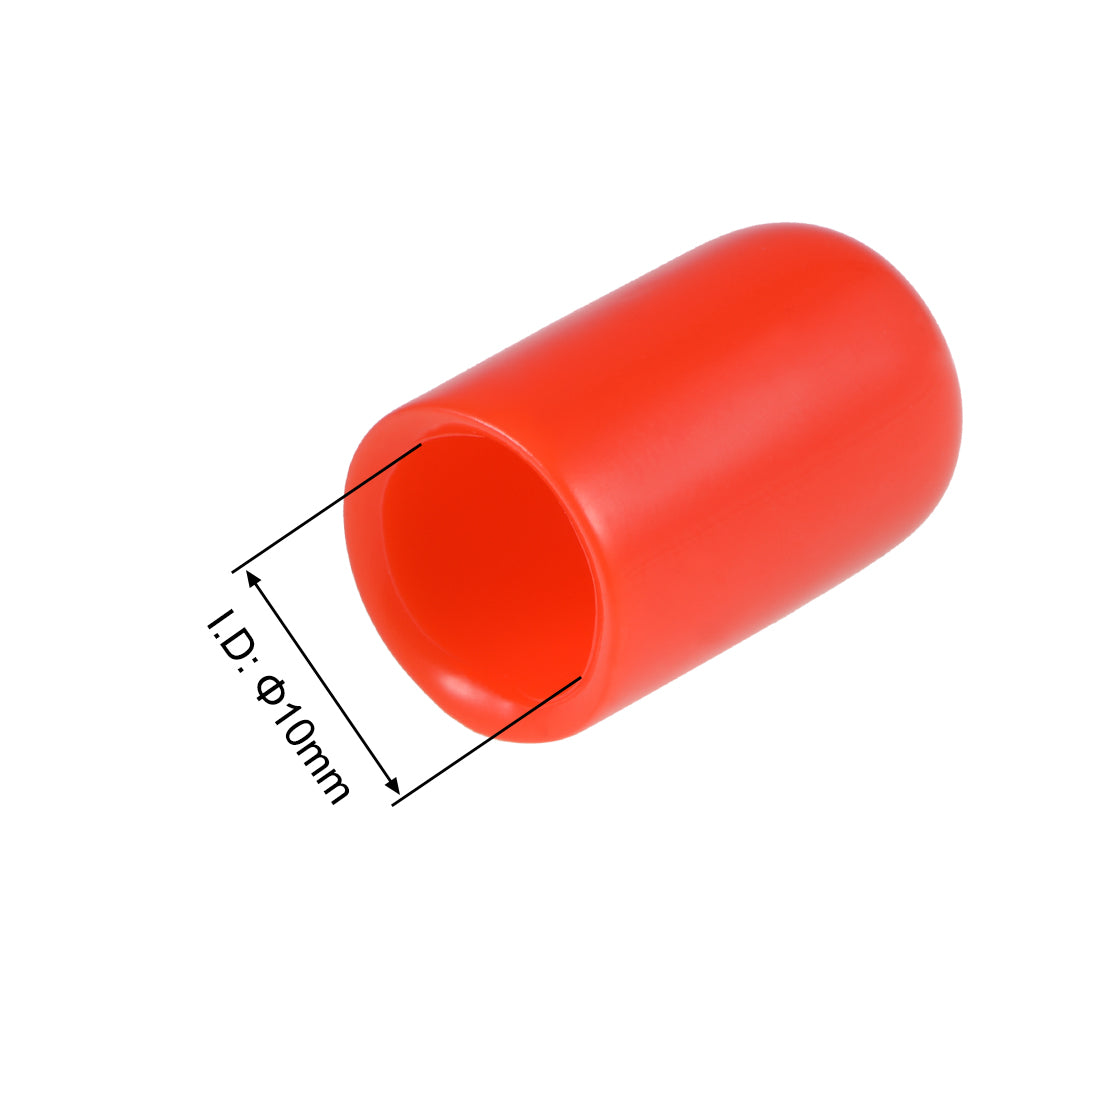 uxcell Uxcell 200pcs Rubber End Caps 10mm ID 20mm Height Screw Thread Protectors Red